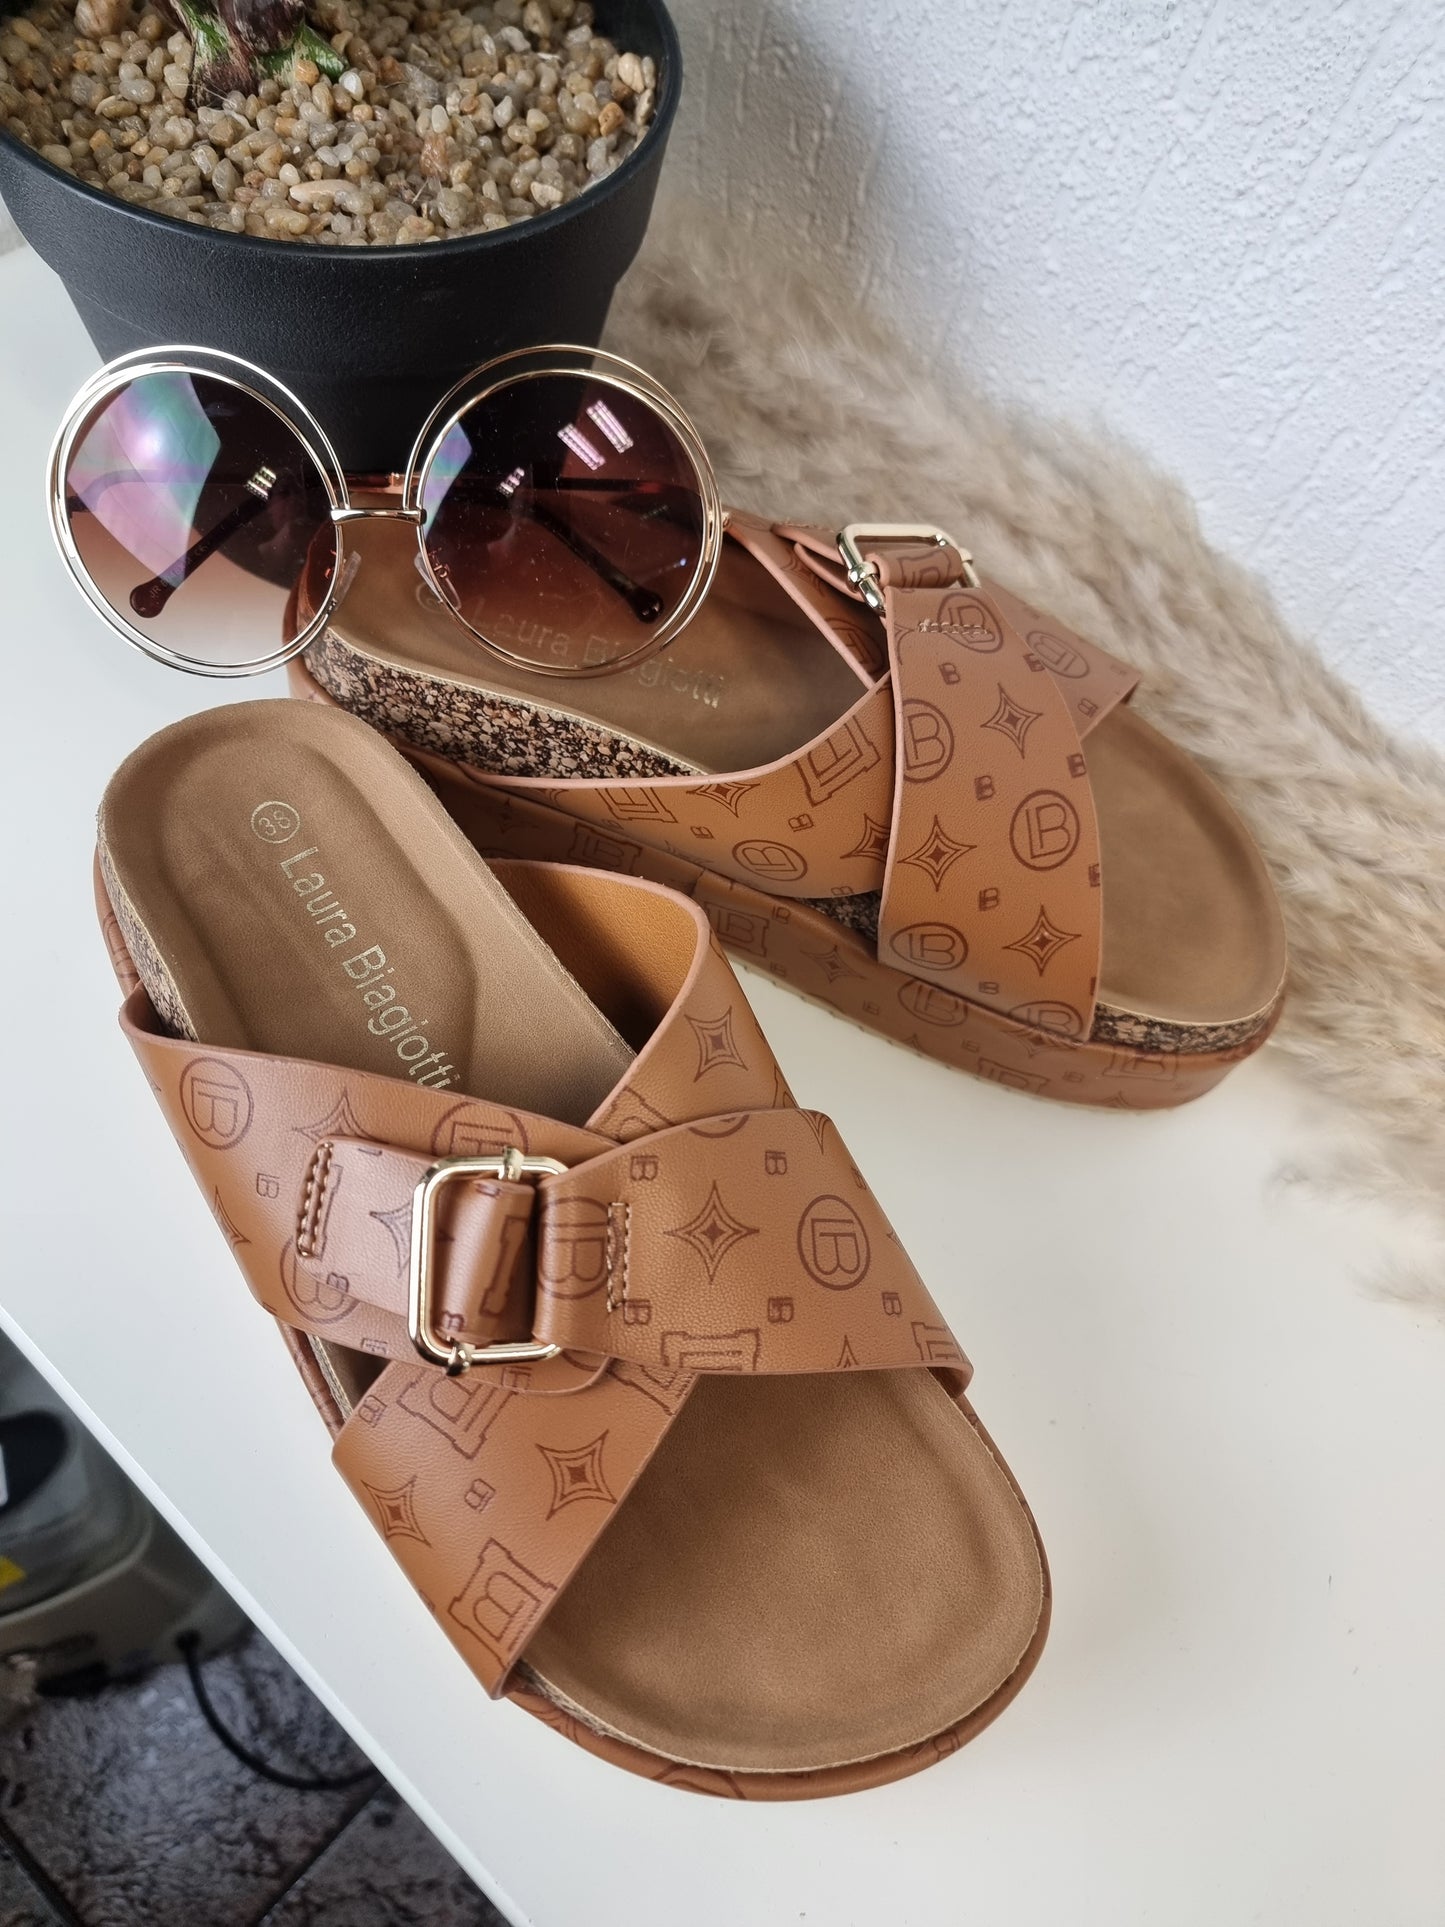 Laura Biagiotti Pantolette mit Plateausohle in Camel